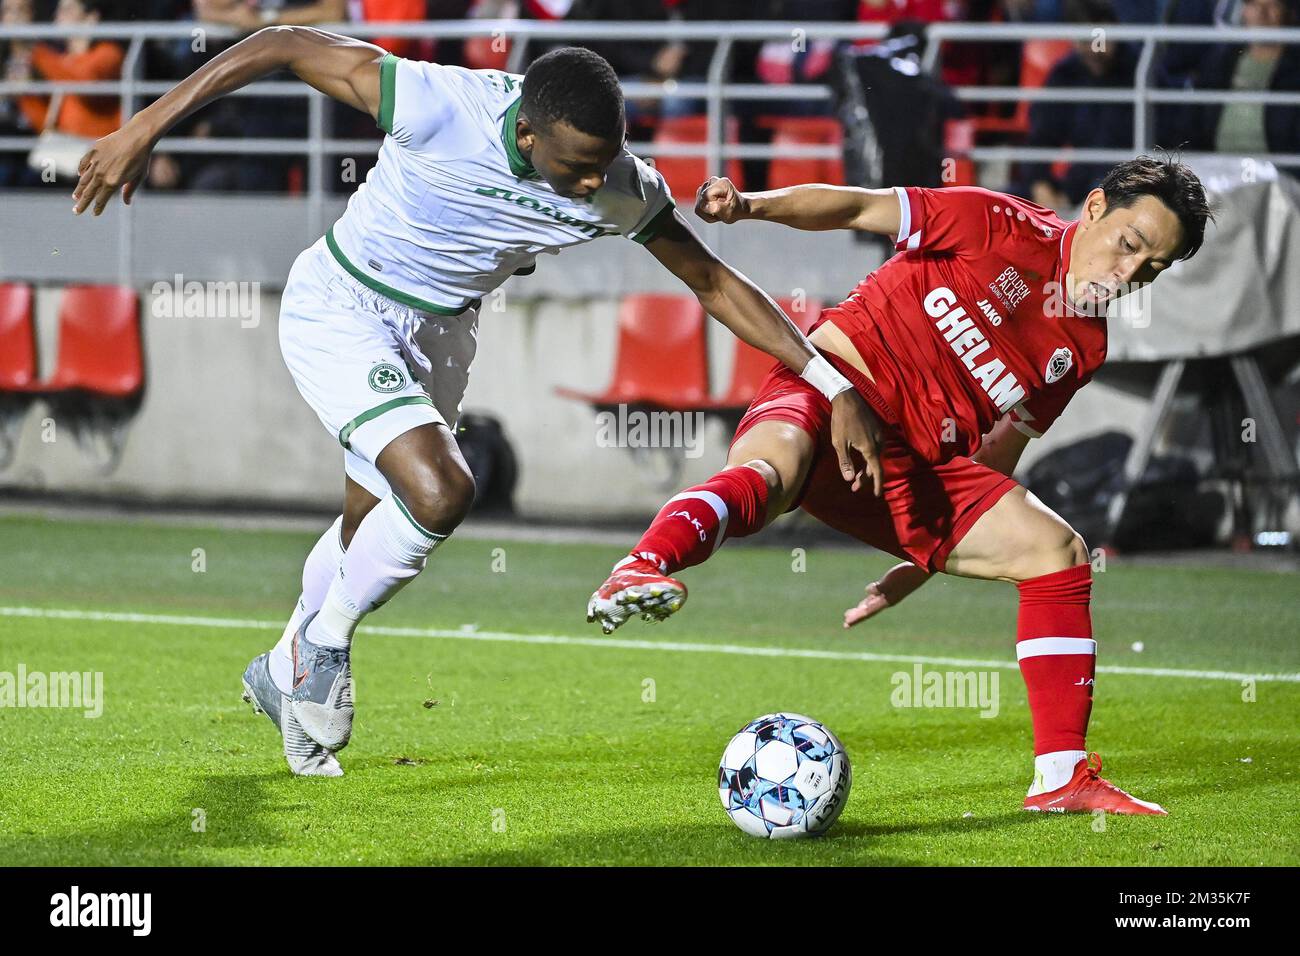 Omonoia's Shehu Abdullahi and Antwerp's Koji Miyoshi fight for the ball during a soccer game between Belgian team Royal Antwerp FC and Cyprus club Omonia Nicosia, Thursday 26 August 2021 in Antwerp, the return leg of the play-off for the Europa League competition. BELGA PHOTO LAURIE DIEFFEMBACQ Stock Photo